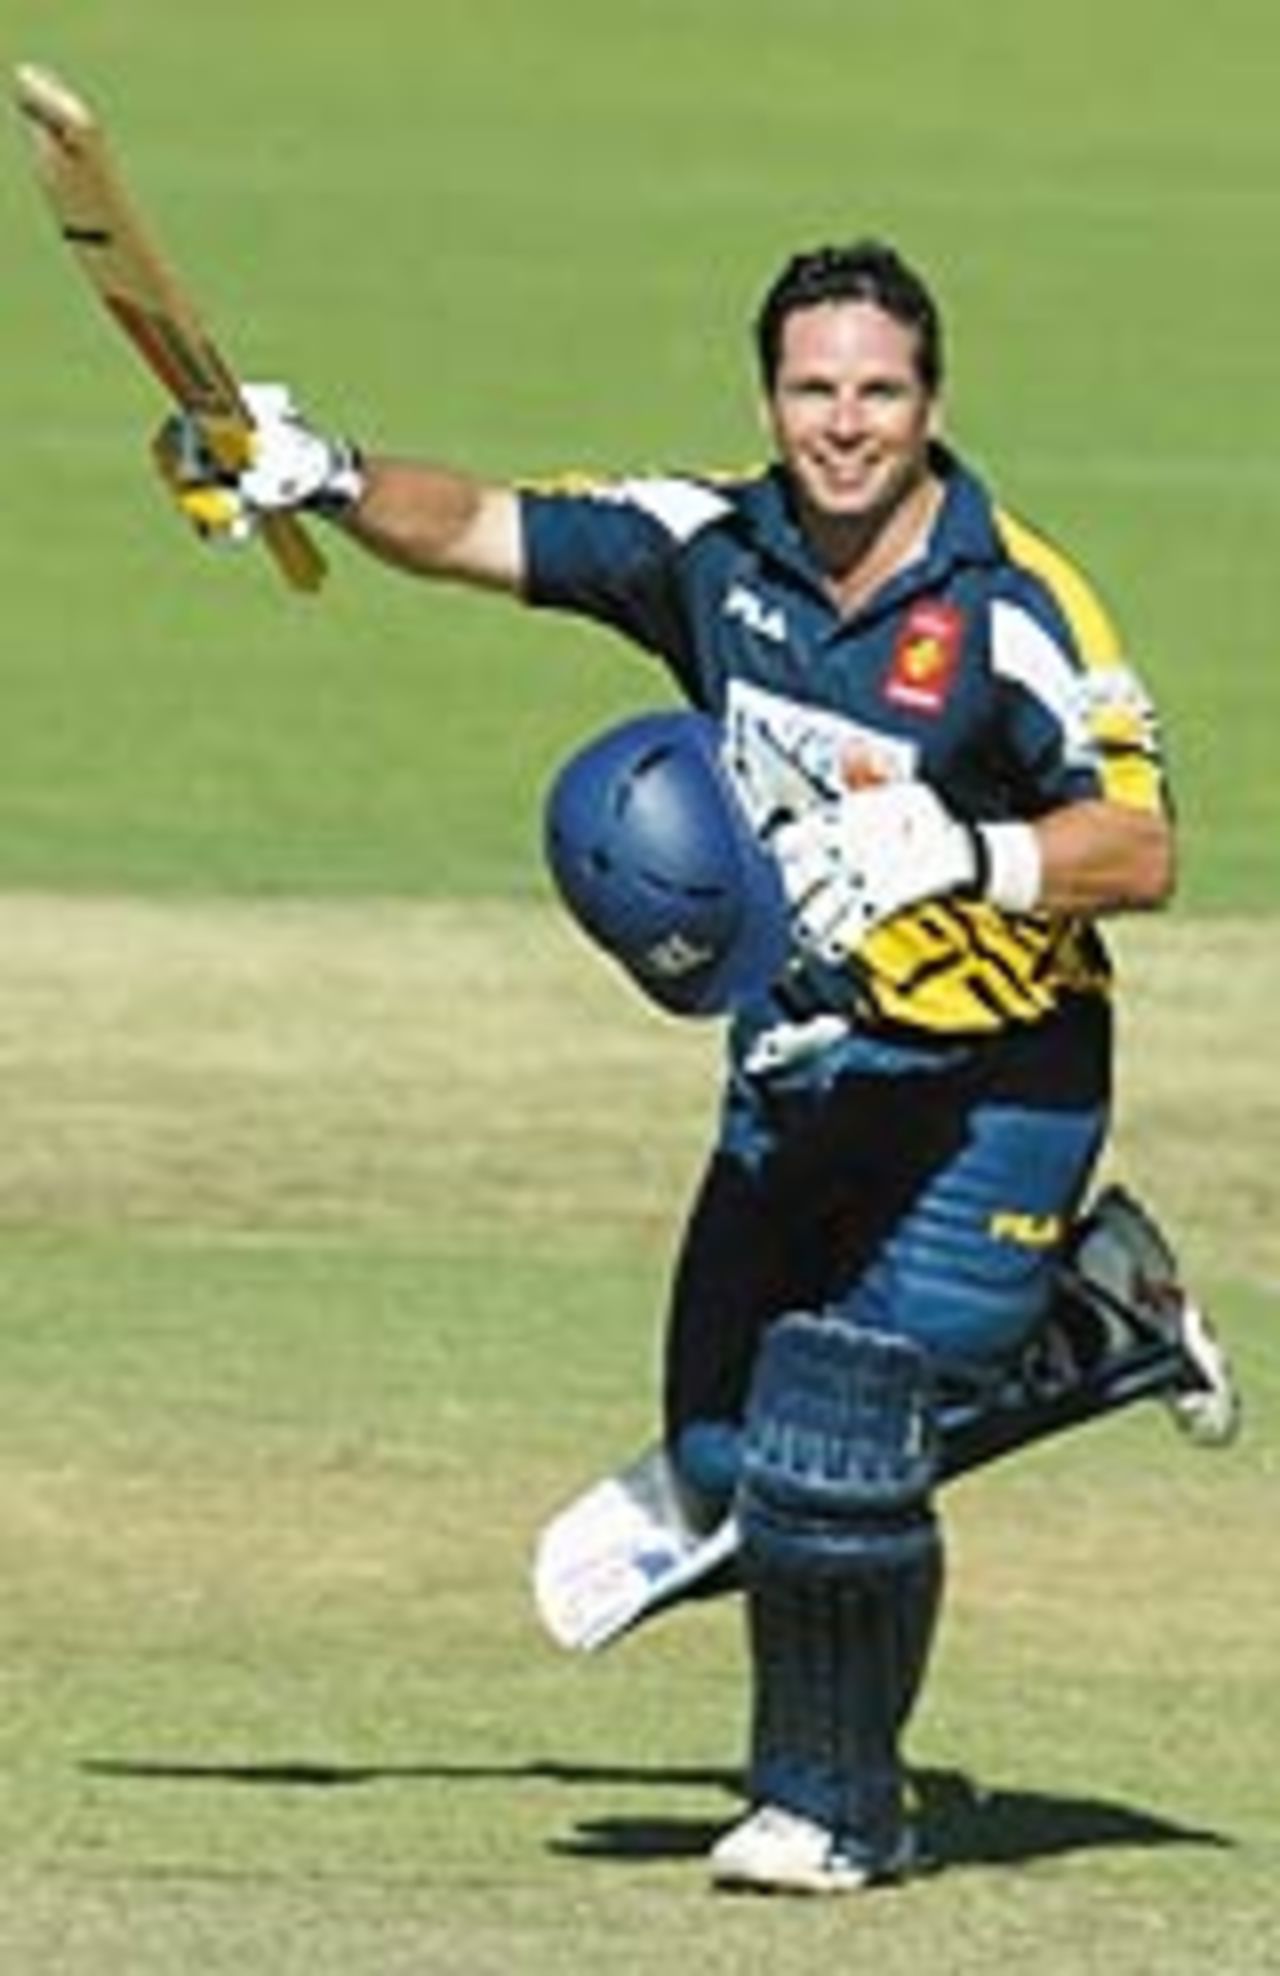 Brad Hodge of the Bushrangers reaches his century in the ING Cup, South Australia v Victoria, Adelaide Oval, January 30, 2004